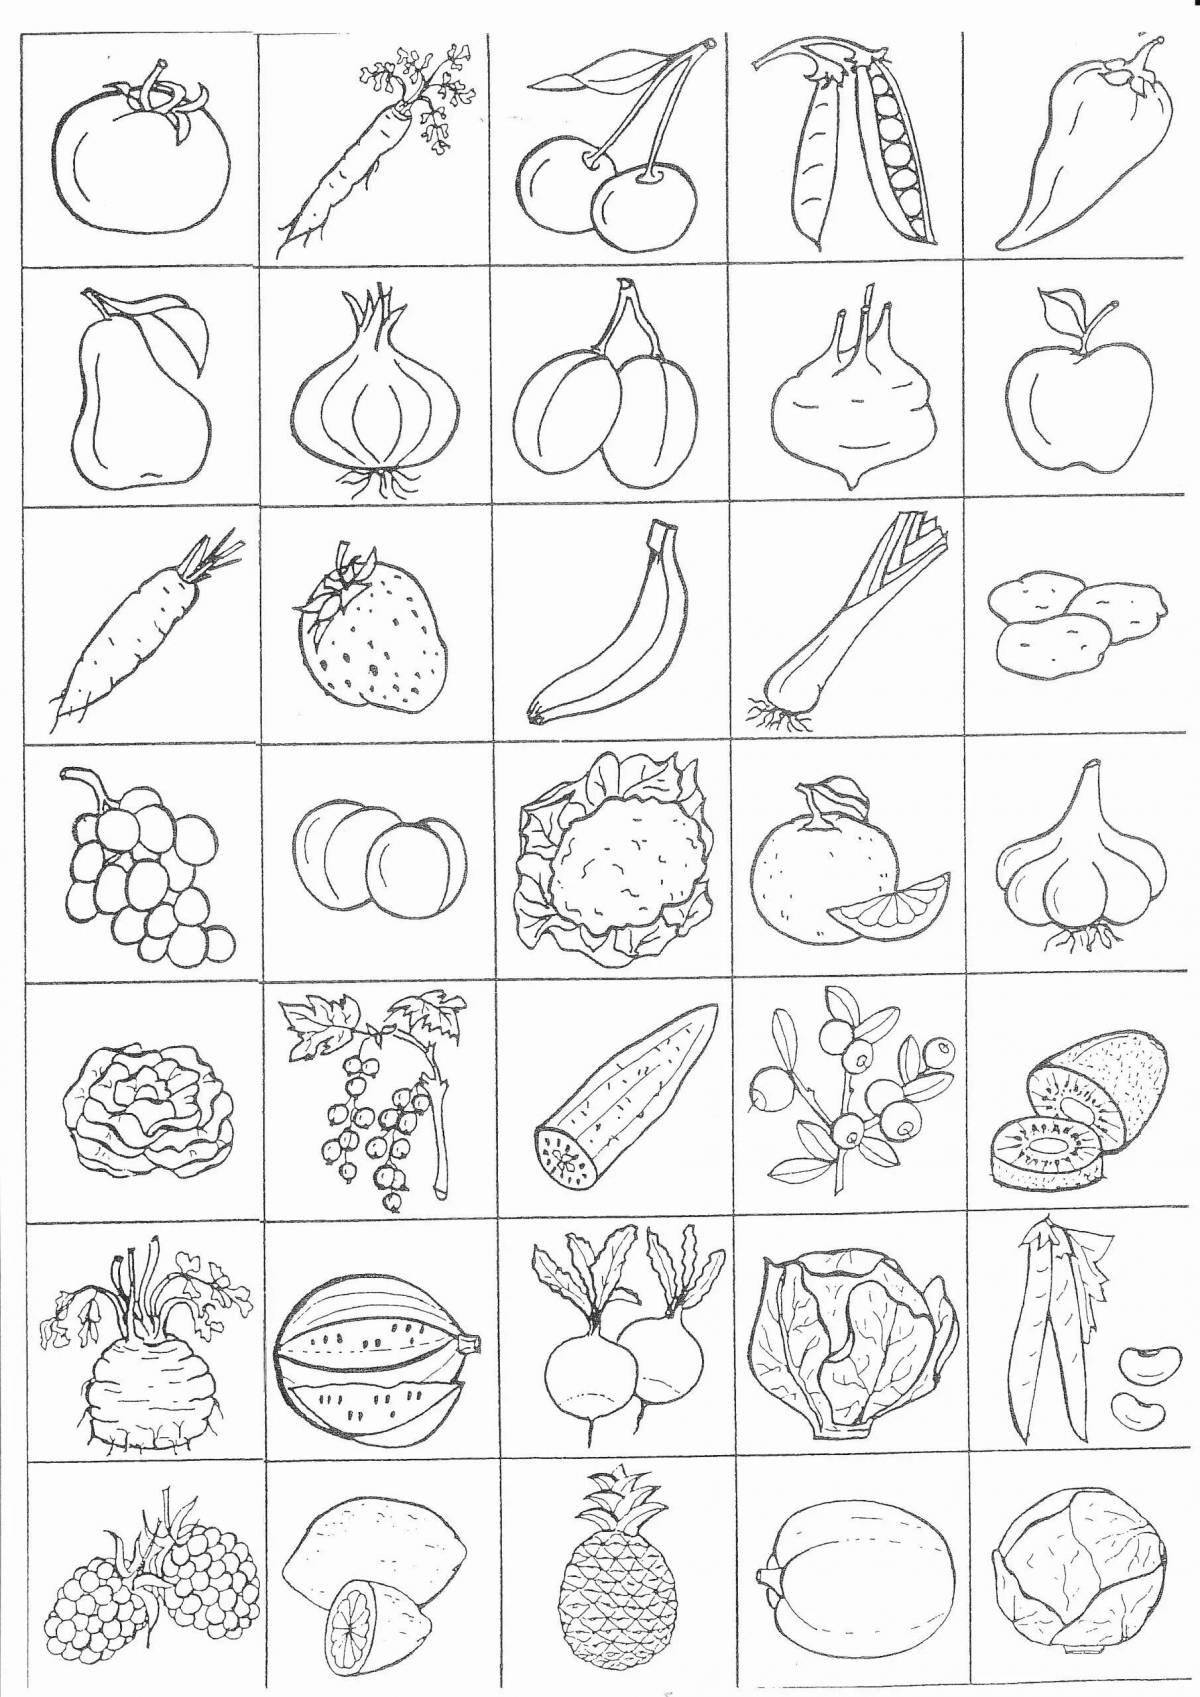 Colourful coloring pages for a relaxing pastime